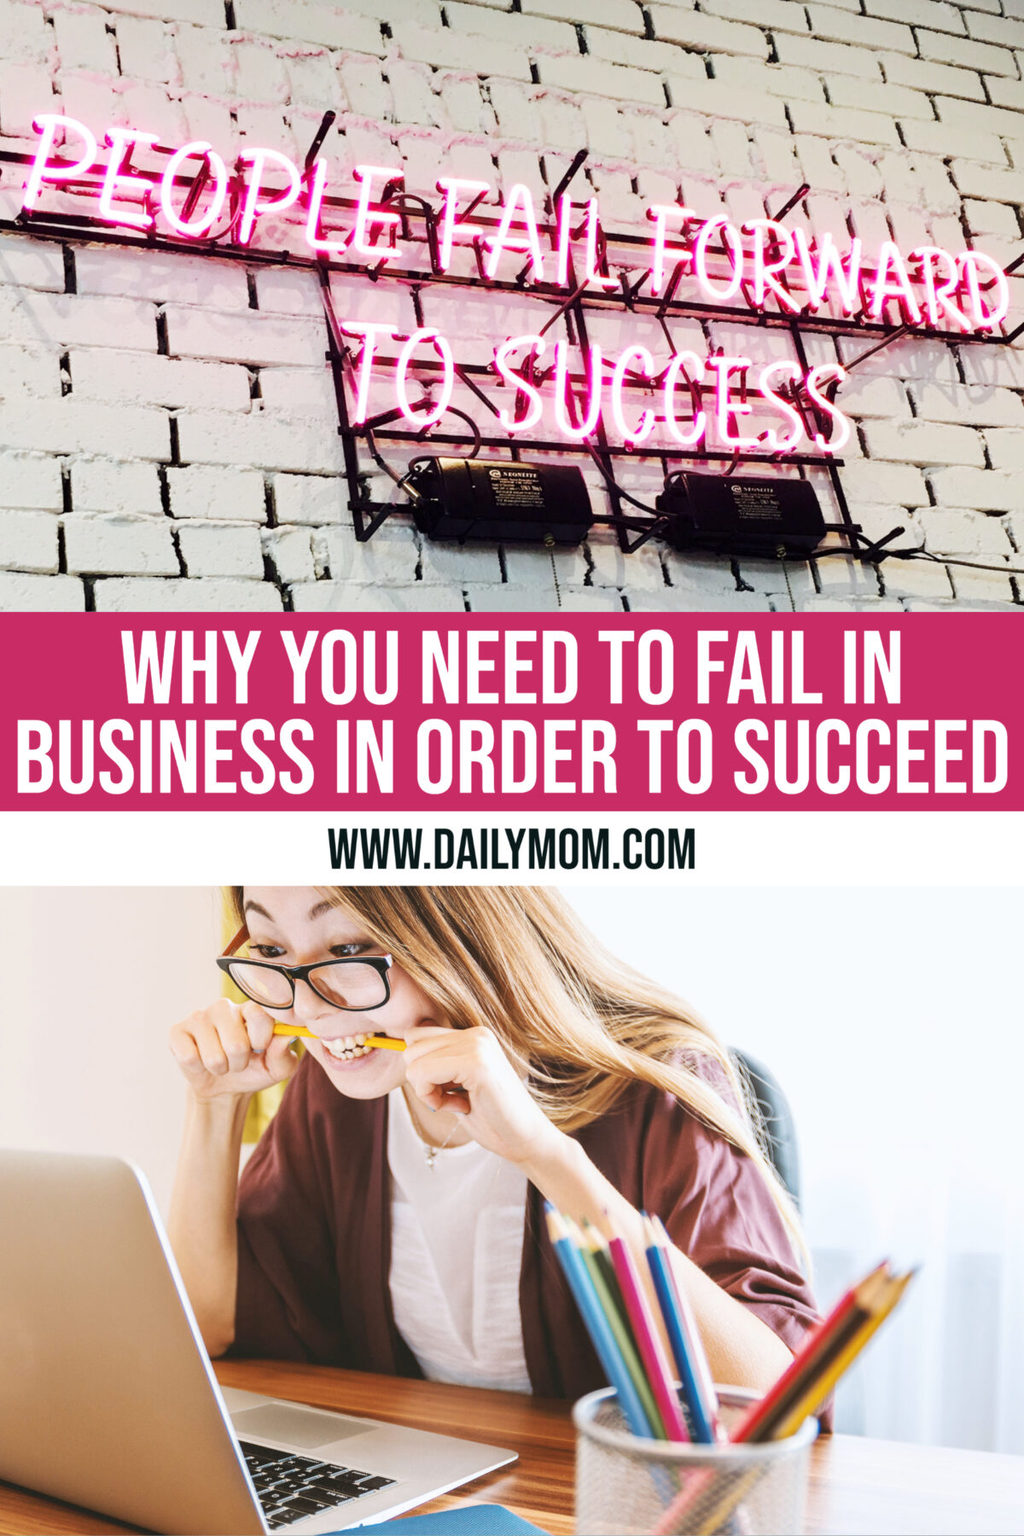 Why You Need To Fail In Business In Order To Succeed